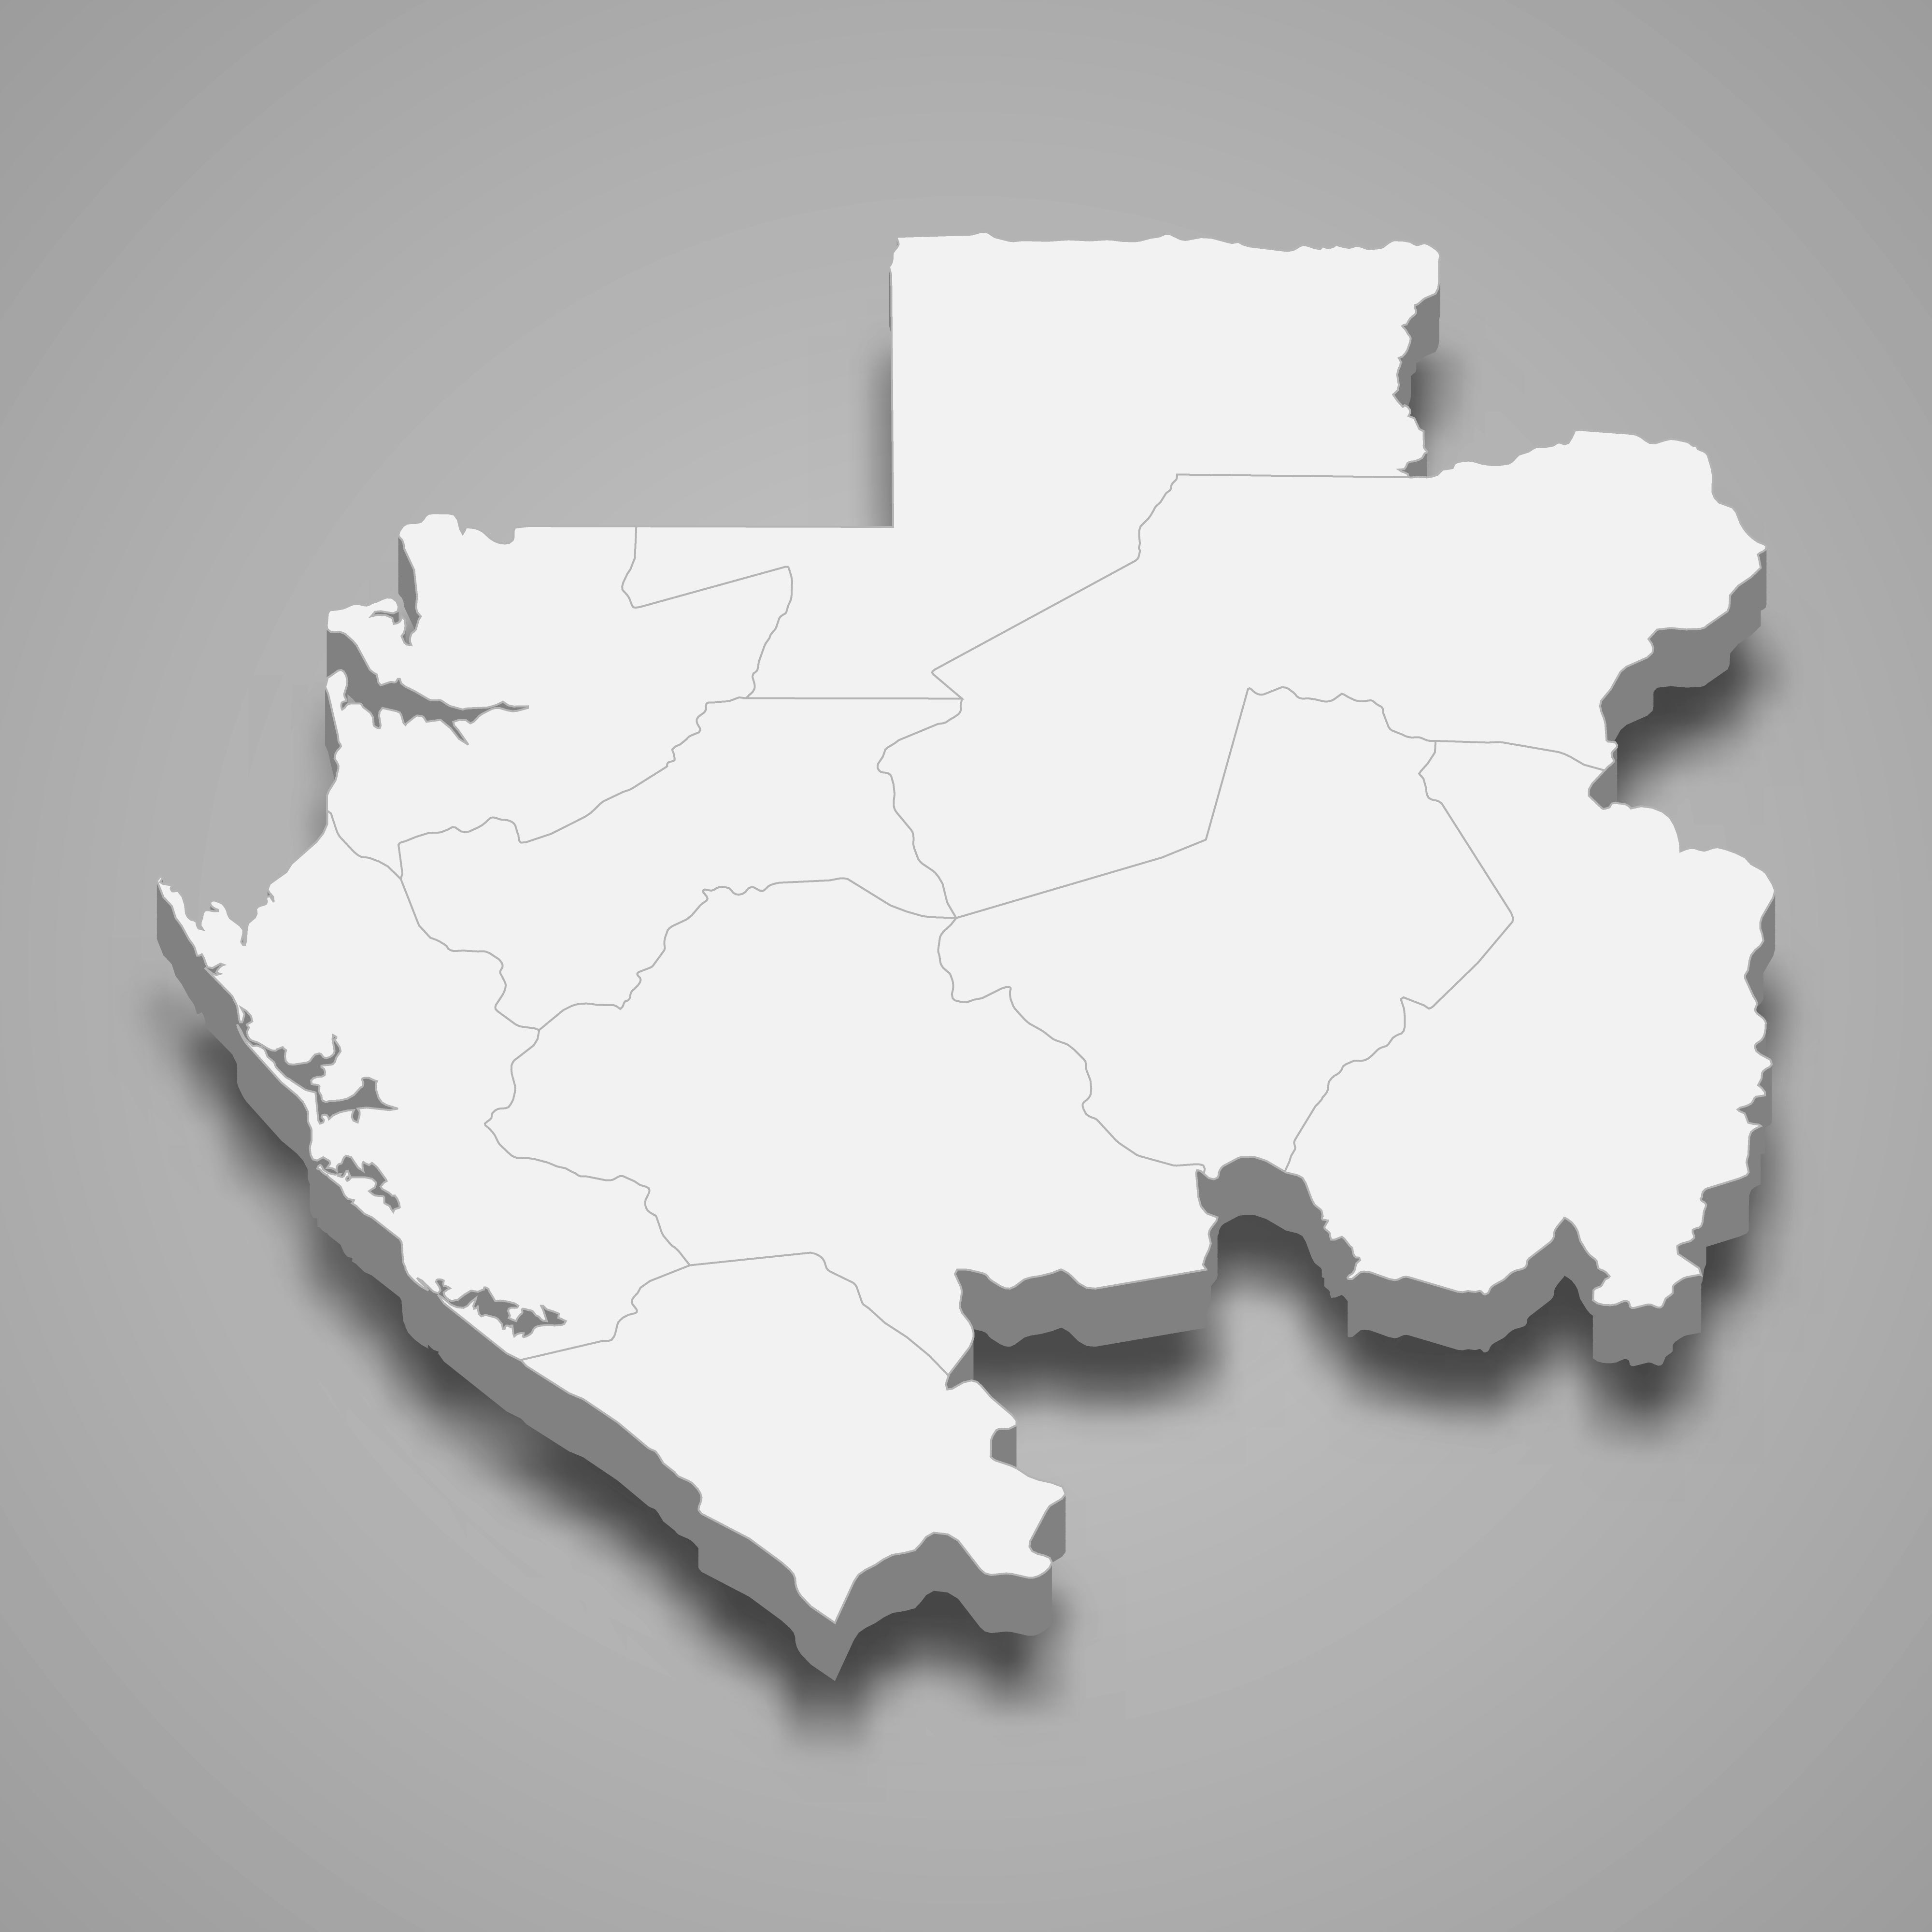 3d map of Gabon with borders of regions. 3d map with borders of regions Template for your design